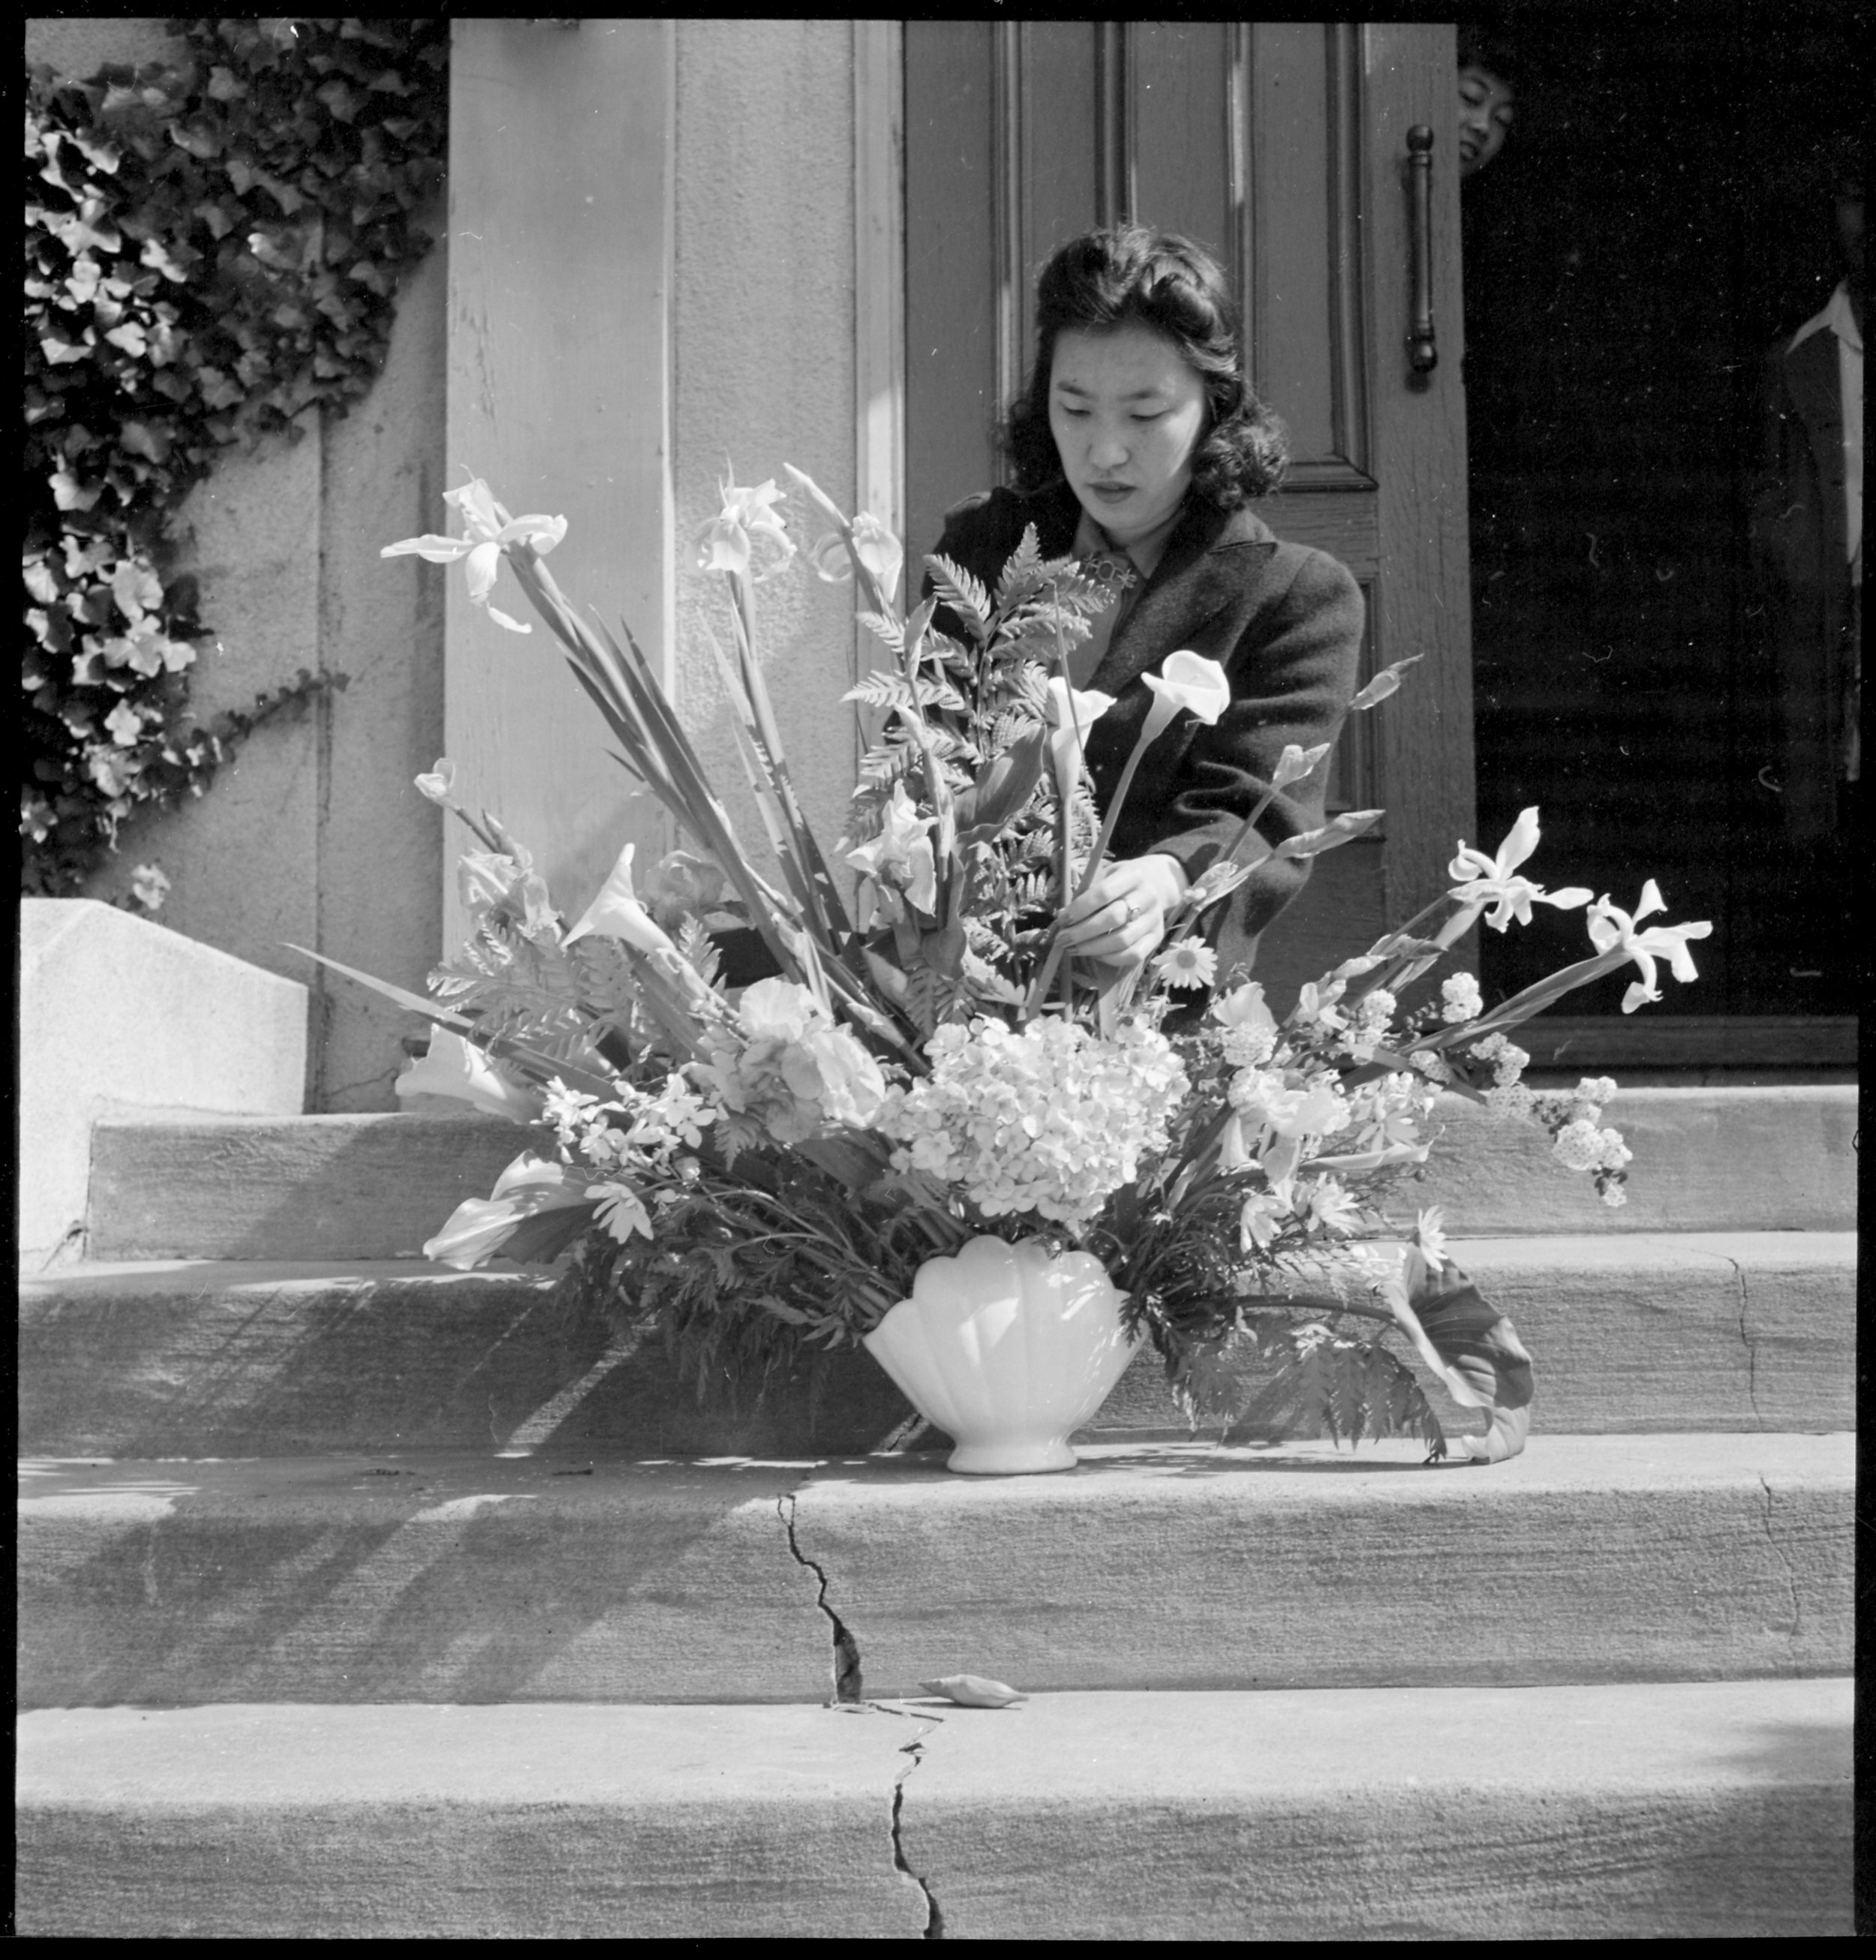  Oakland, California. Arranging flowers for altar on last day of service at Japanese Independent Congregational Church, prior to evacuation. Evacuees of Japanese ancestry will be housed at War Relocation Authority centers for the duration. 